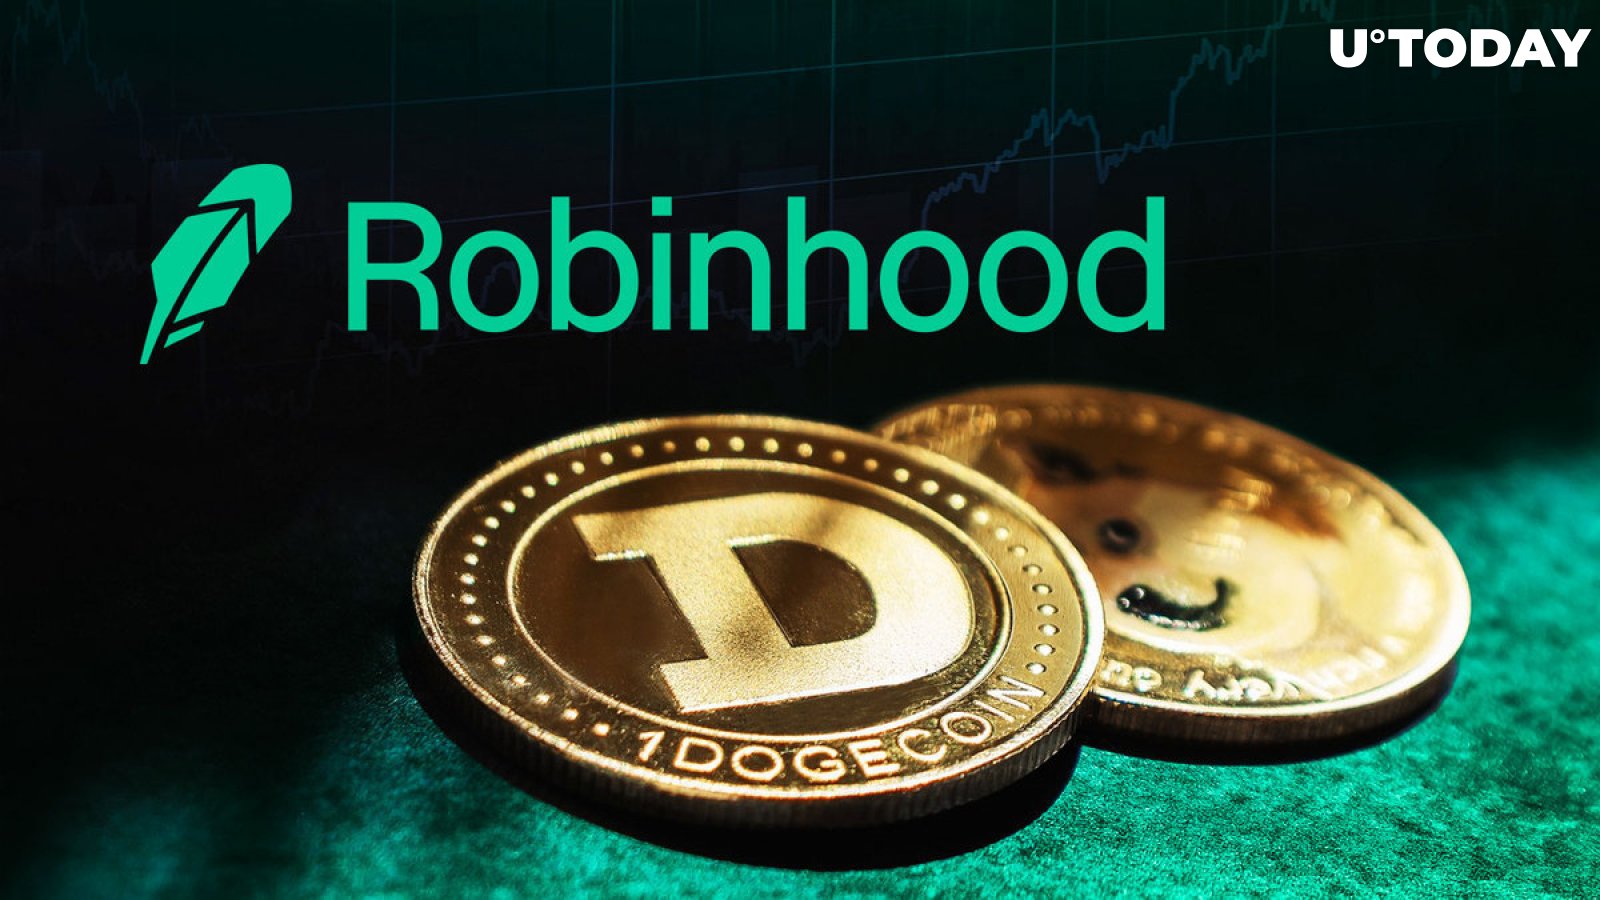 Over 150 Million Dogecoin (DOGE) Transferred to Robinhood - What's Happening?